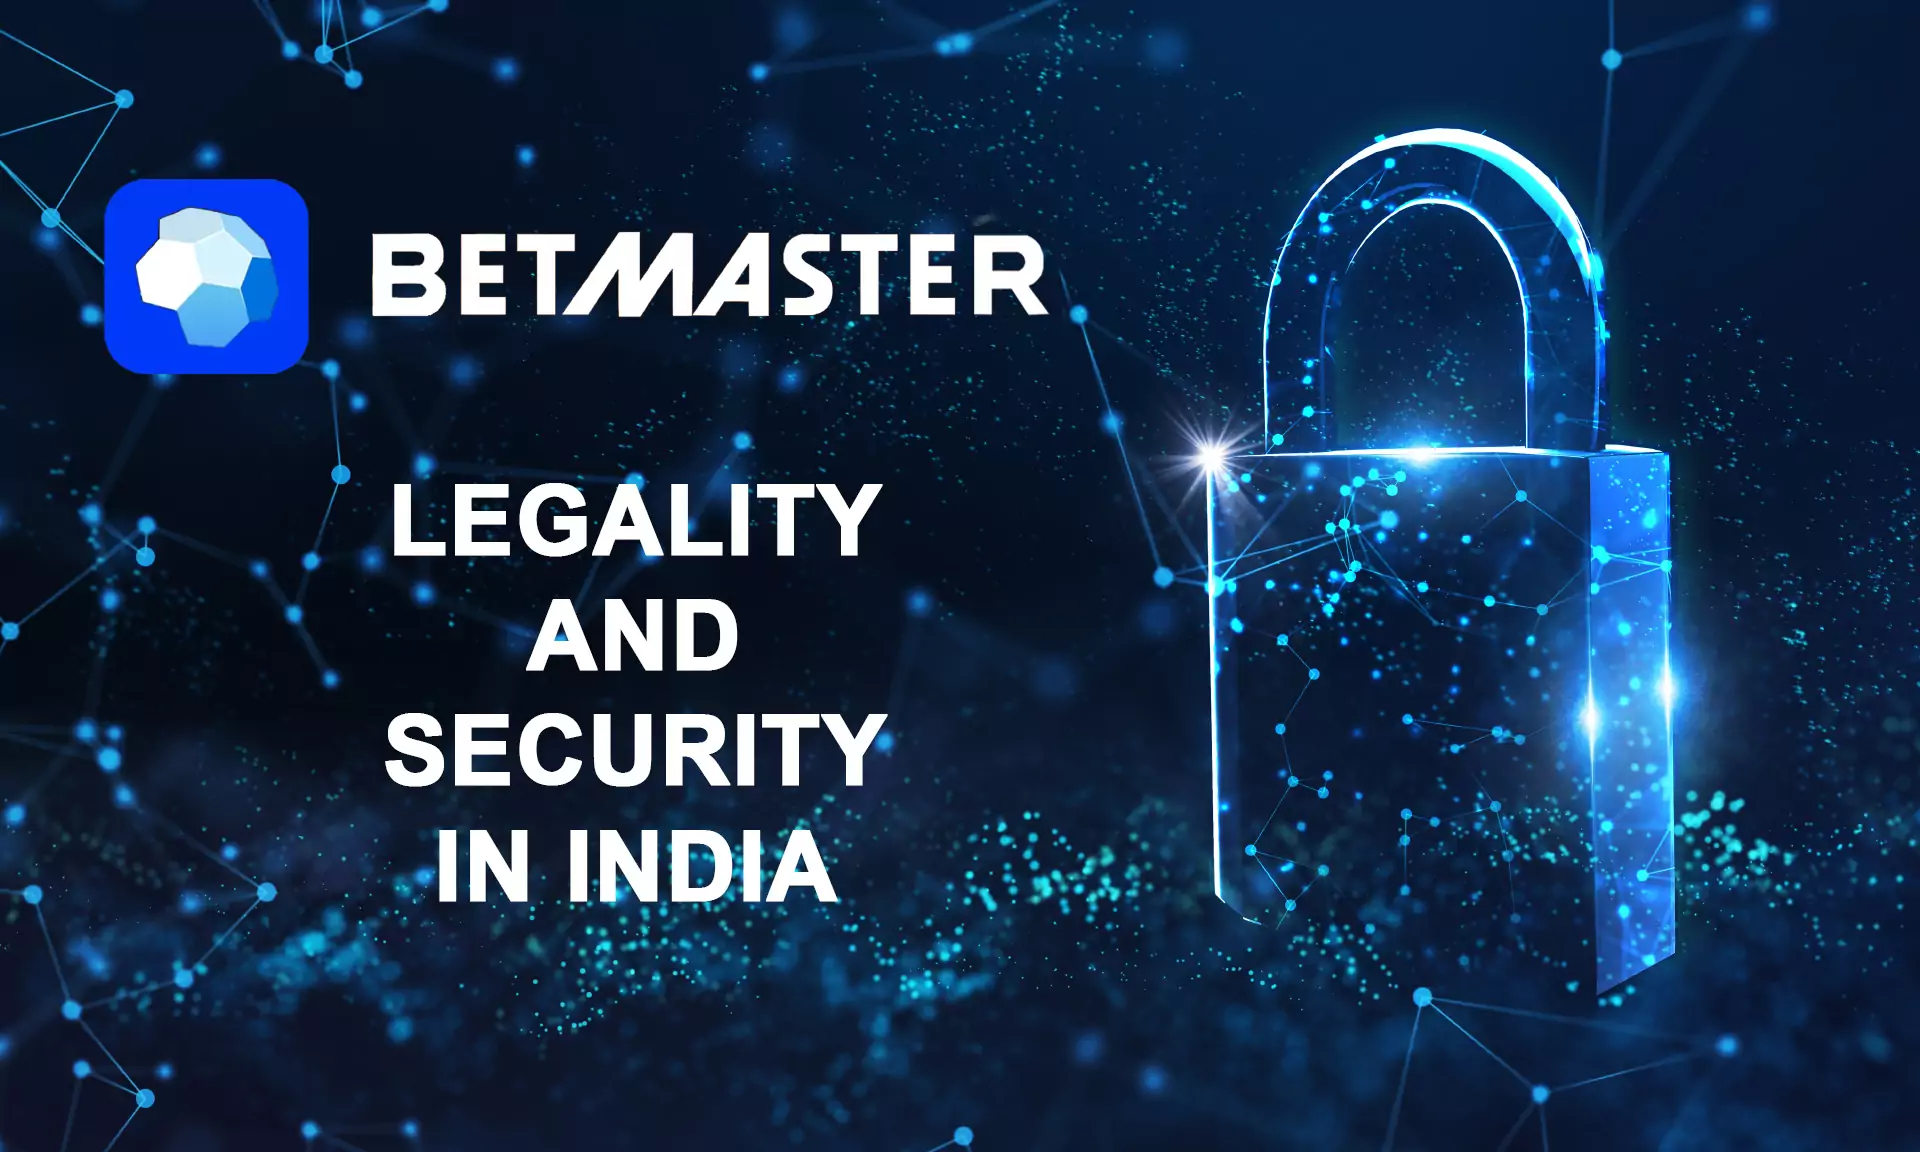 Betmaster is totally legal for betting in India.